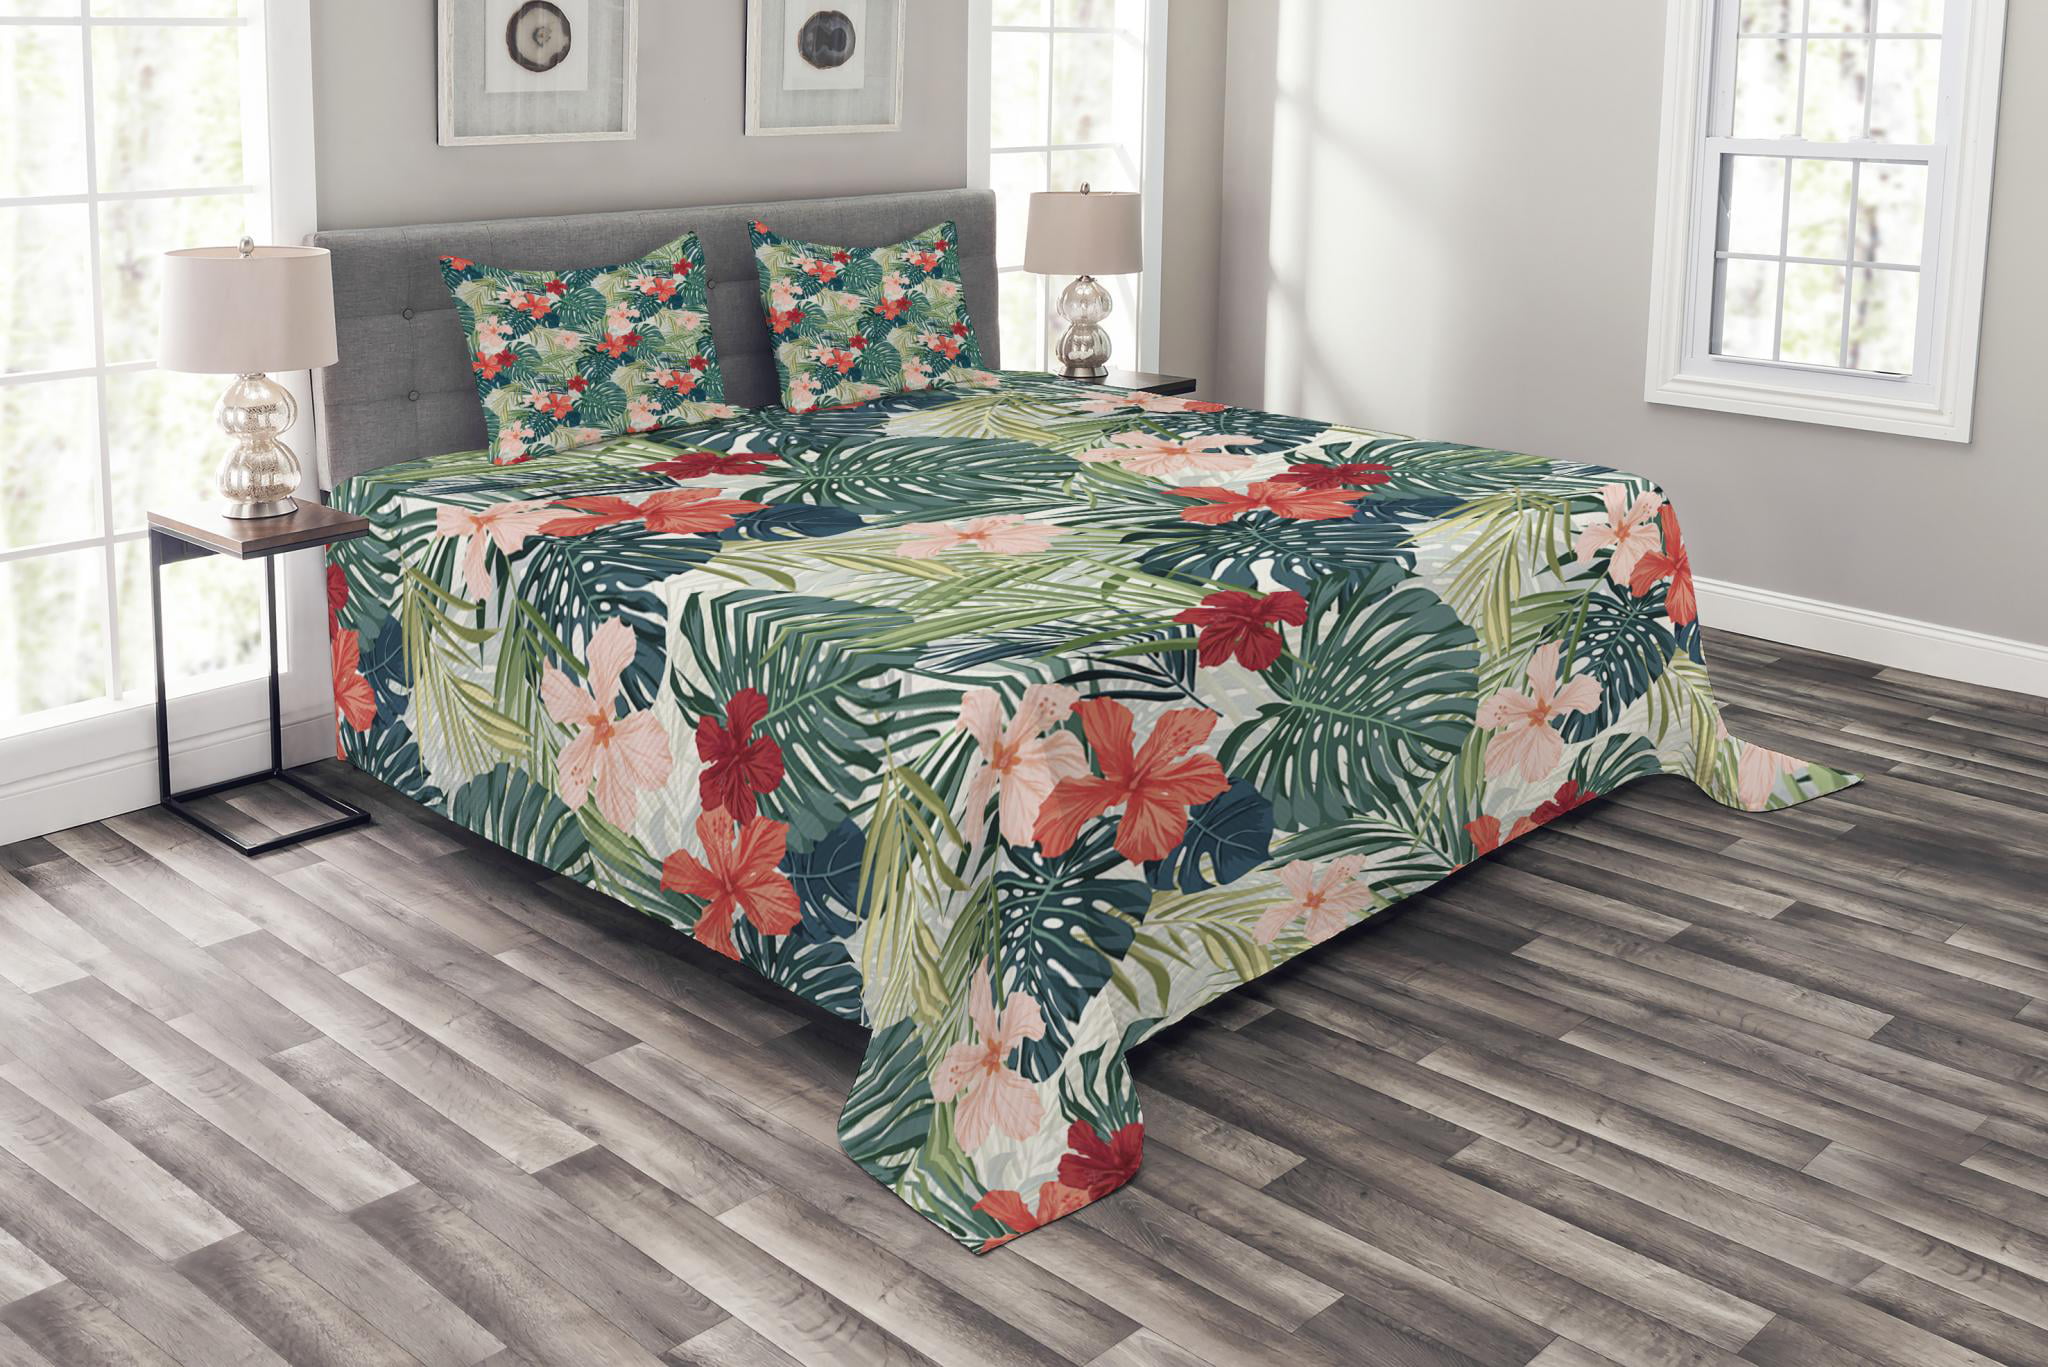 Lunarable Leaf Coverlet Set King Size Hawaiian Summer Tropical Island Vegetation Leaves with Hibiscus Flowers 3 Piece Decorative Quilted Bedspread Set with 2 Pillow Shams Orange Yellow